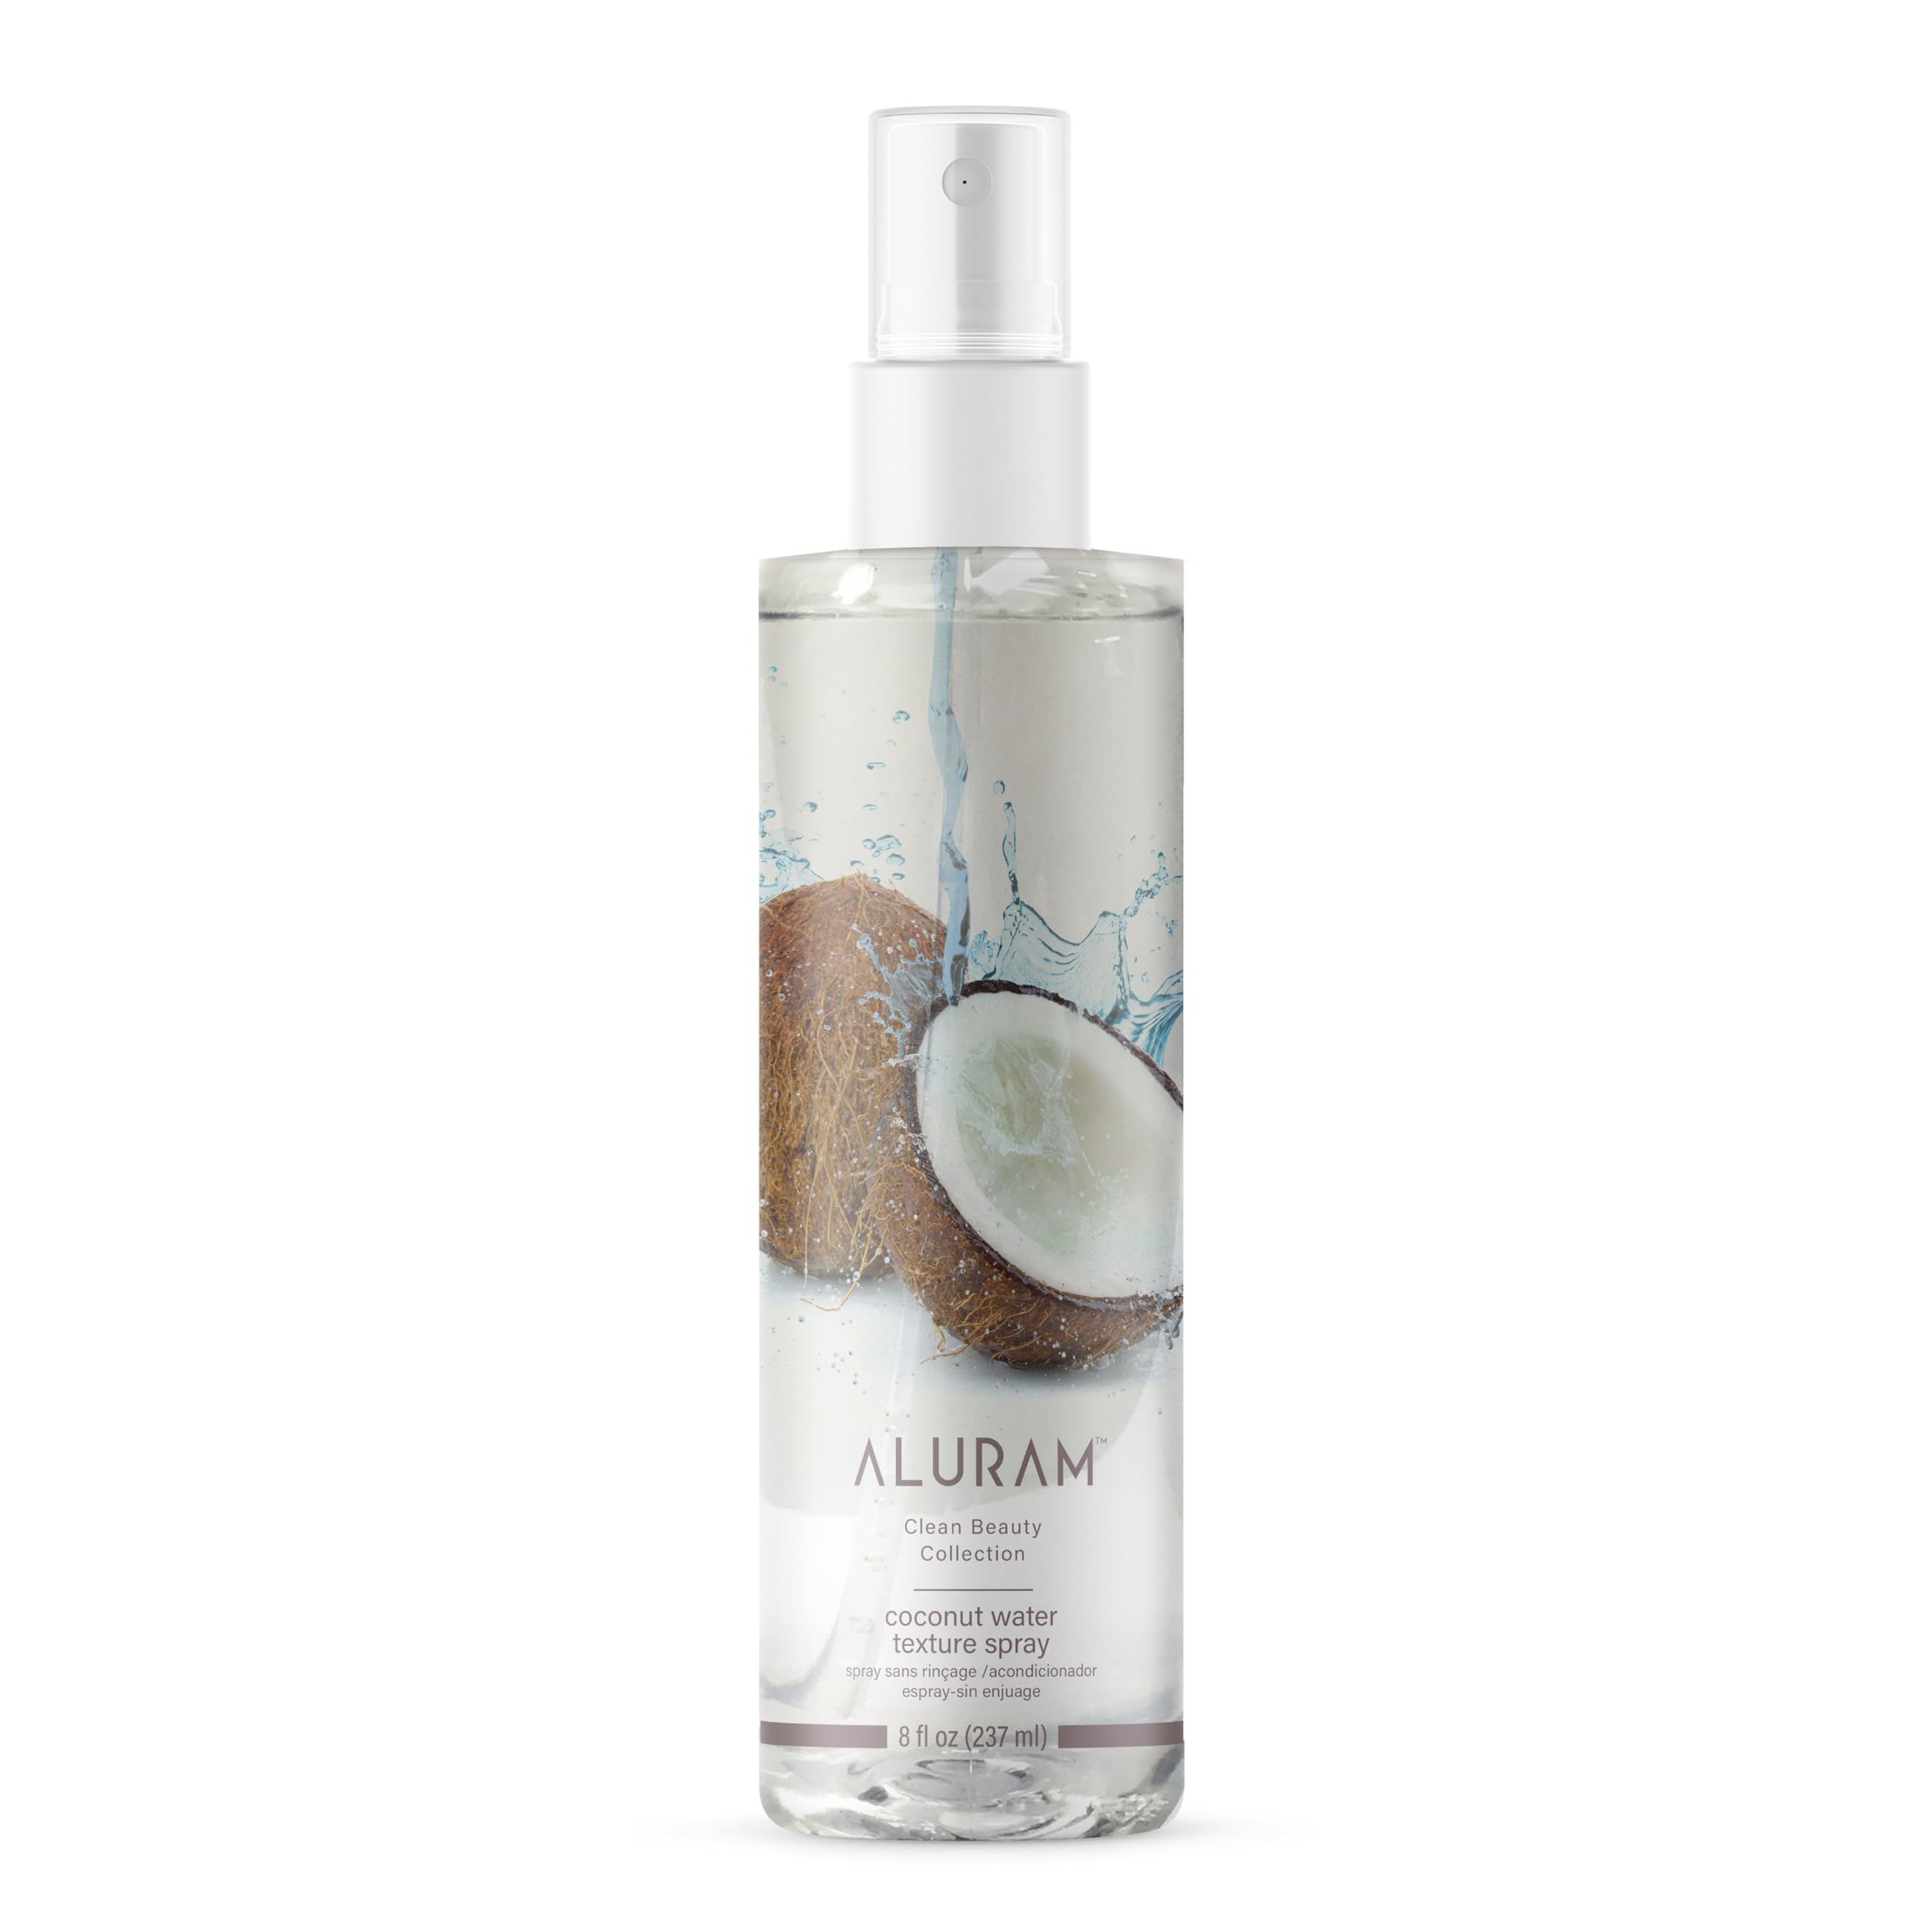 Coconut Water Texture Spray – Just Gorgeous Darling